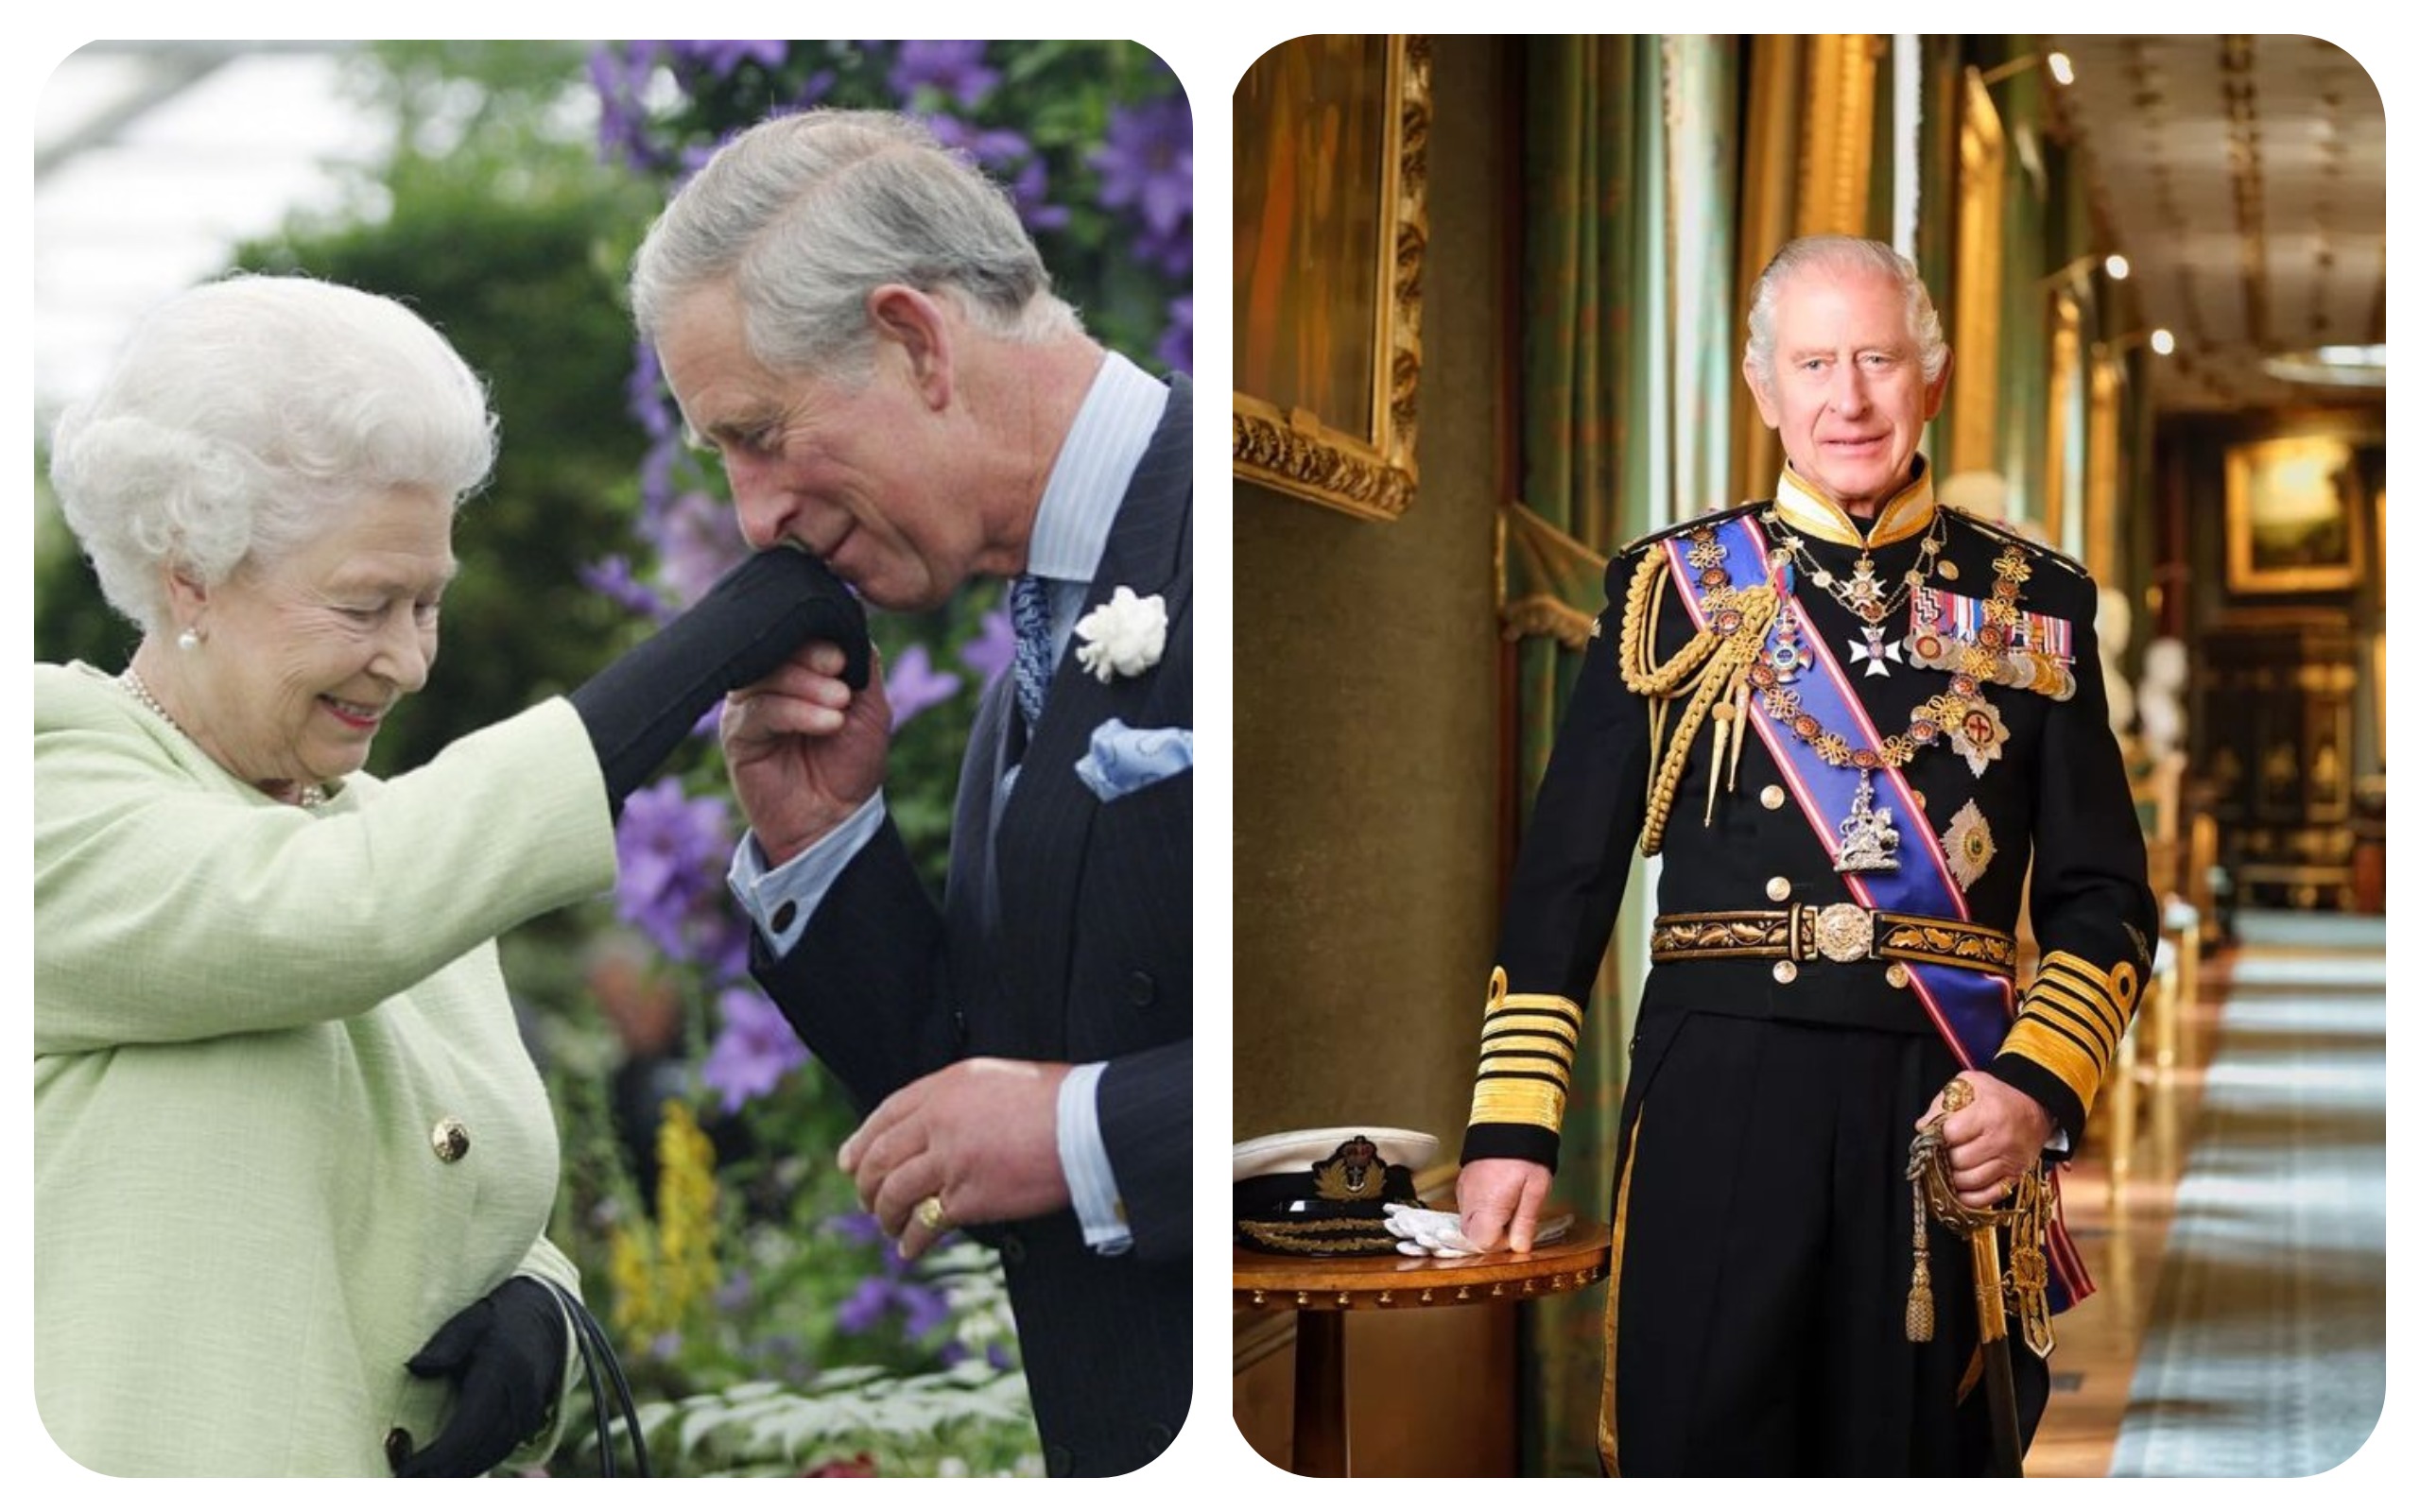 King Charles has officially surpassed his late mother, Queen Elizabeth, in personal wealth